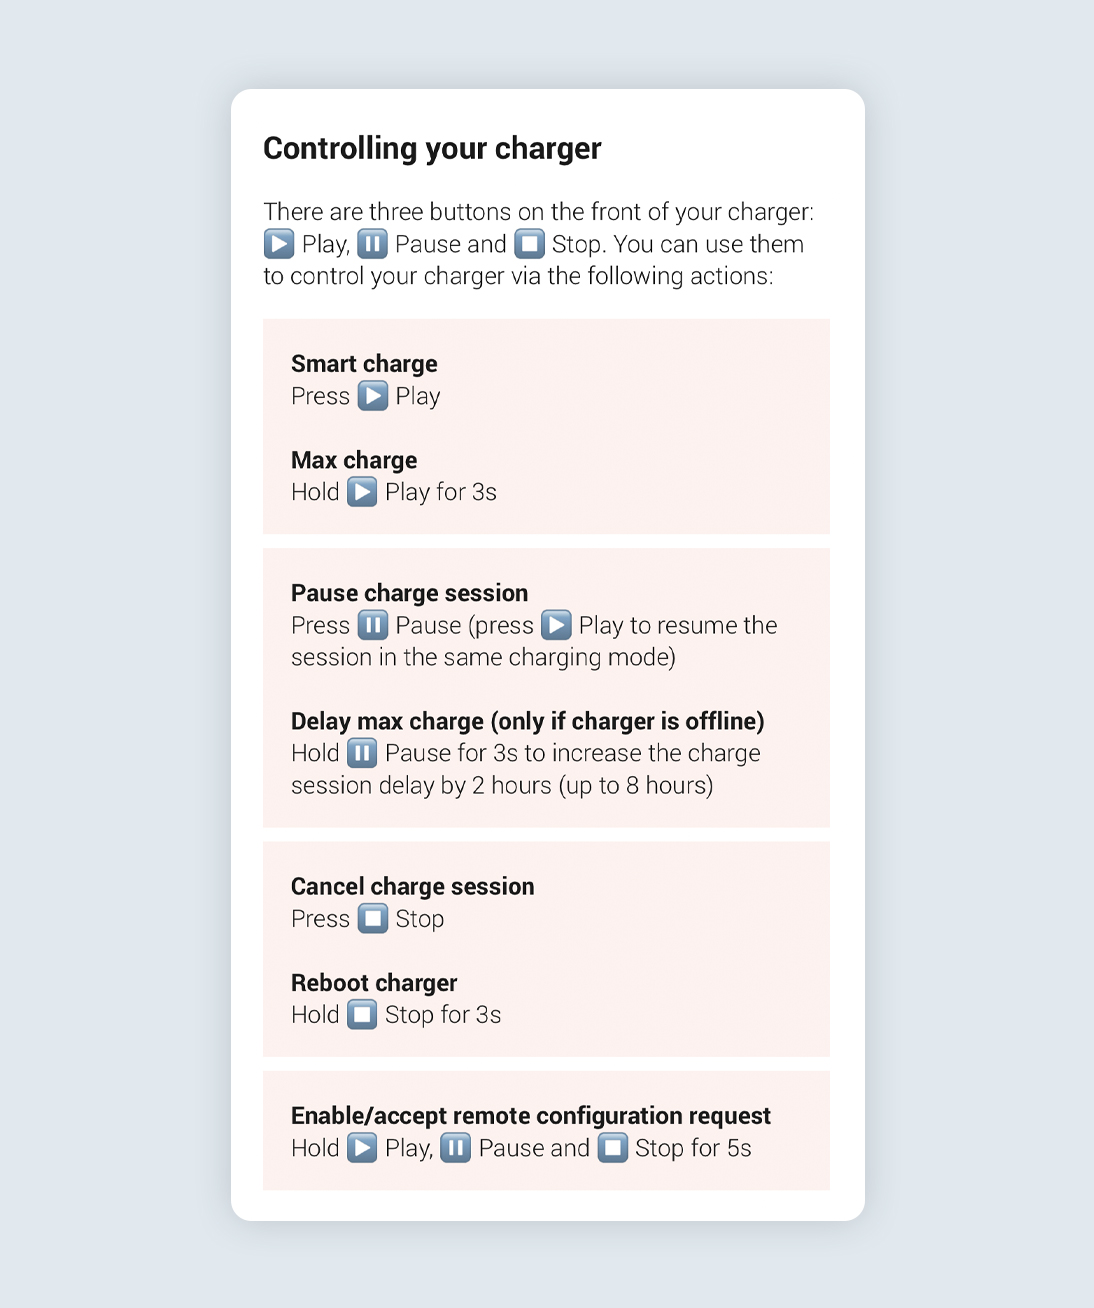 Charger control information from the ohme app